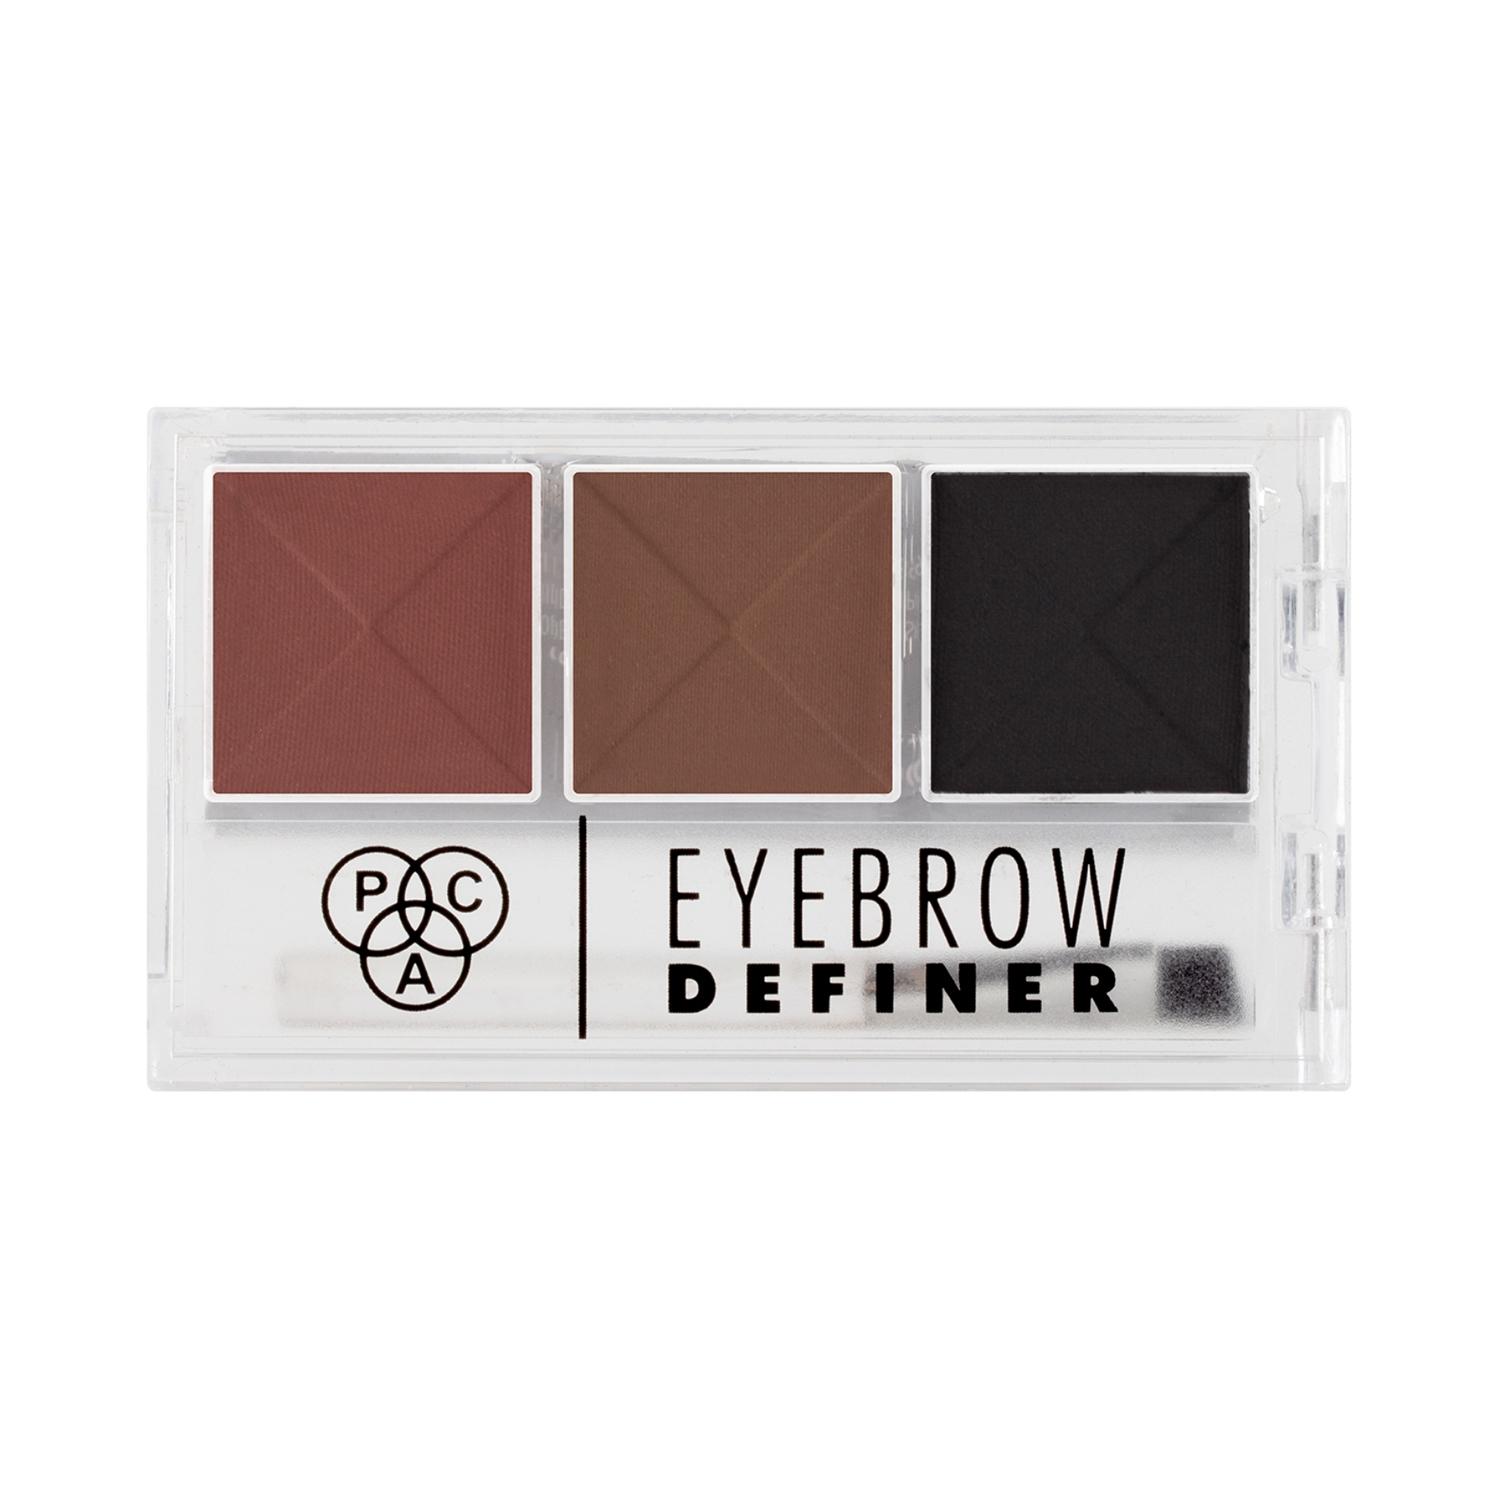 pac-eyebrow-definer---3-colors-(2.5g)